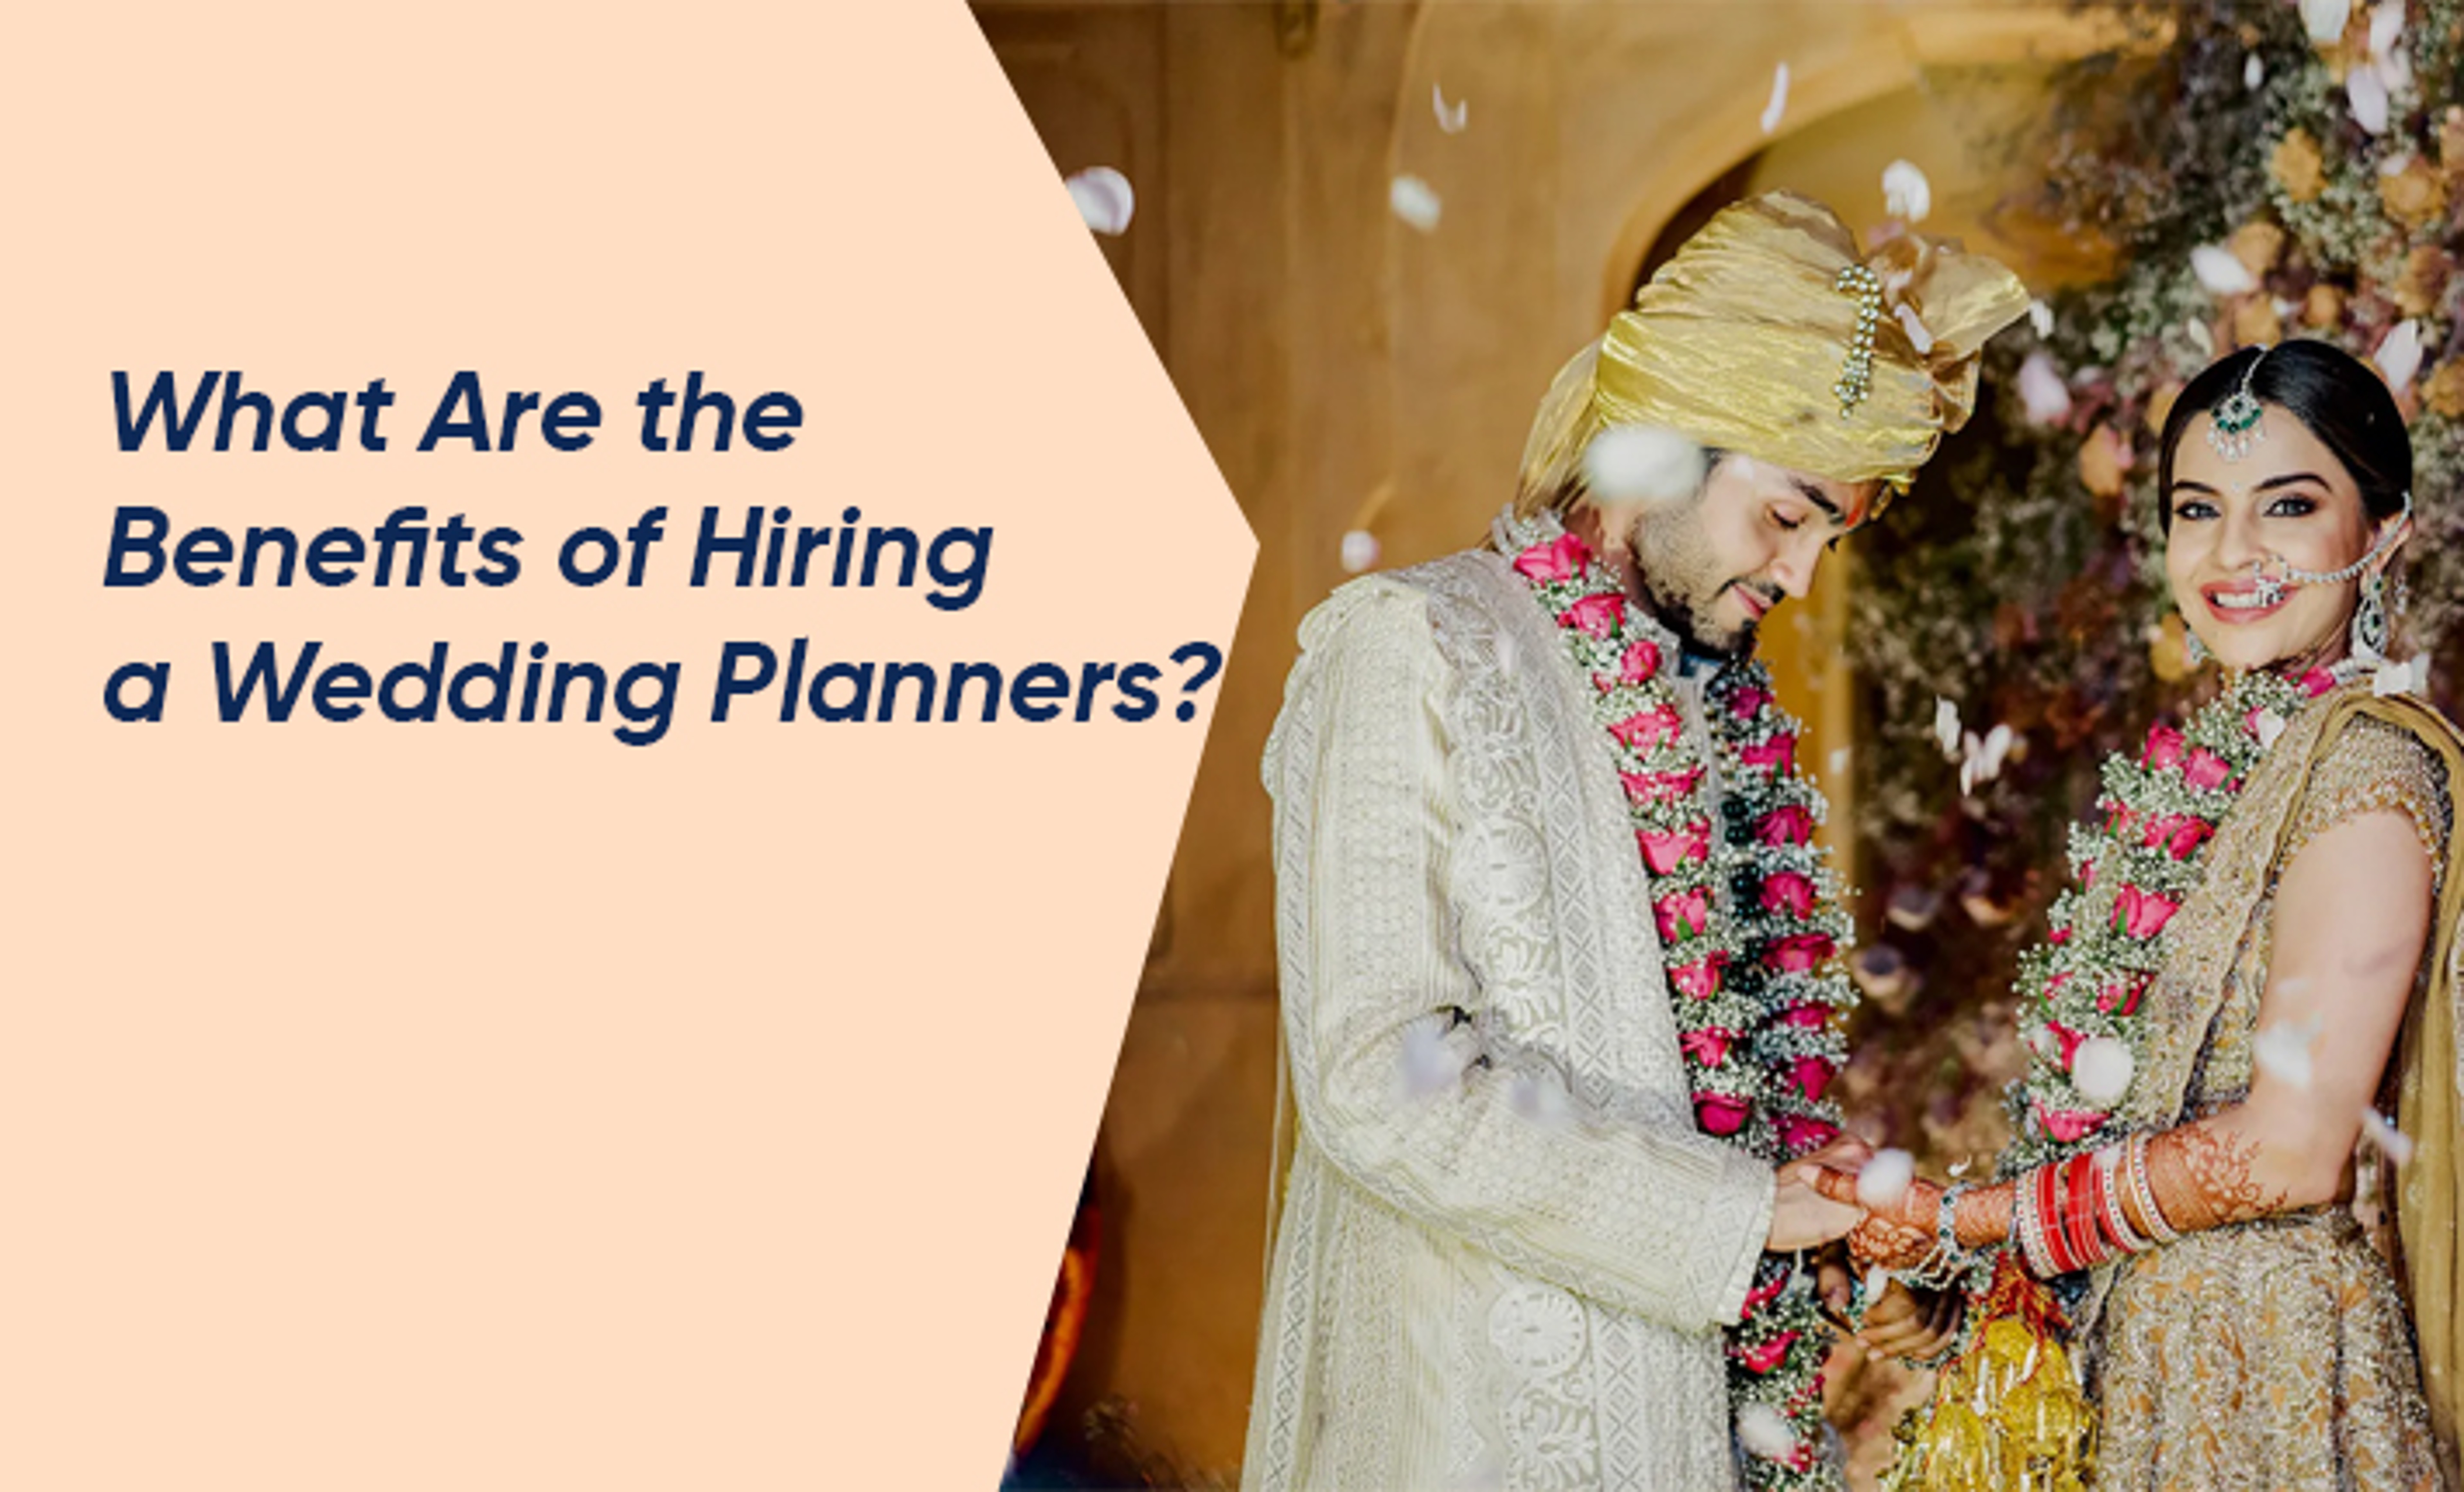 What Are the Benefits of Hiring a Wedding Planner?